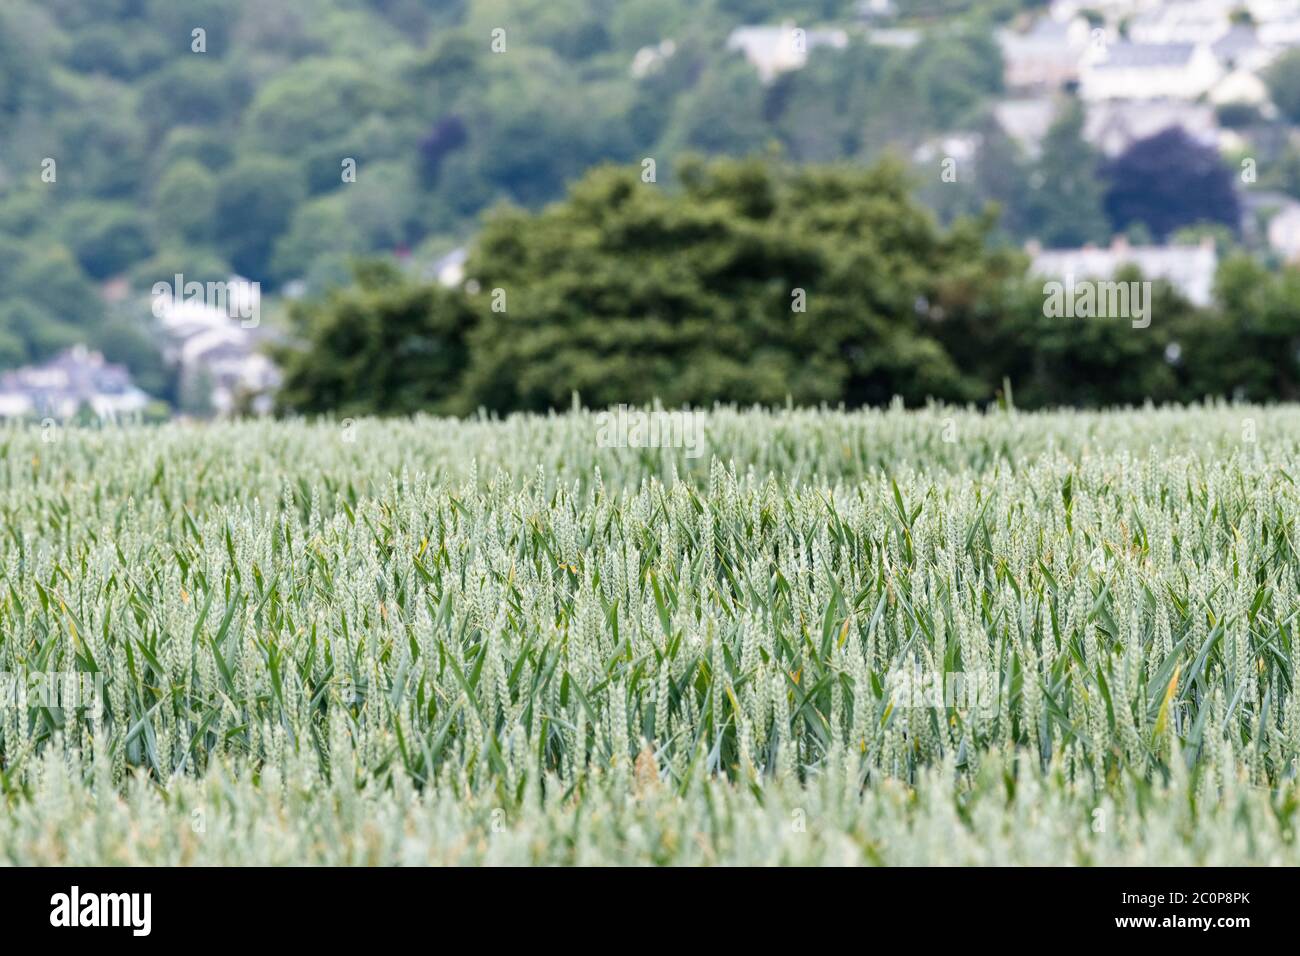 Ripening green wheat / Triticum crop in UK field & buildings behind. Food security, UK agriculture and farming, food growing in the field. Narrow DoF Stock Photo